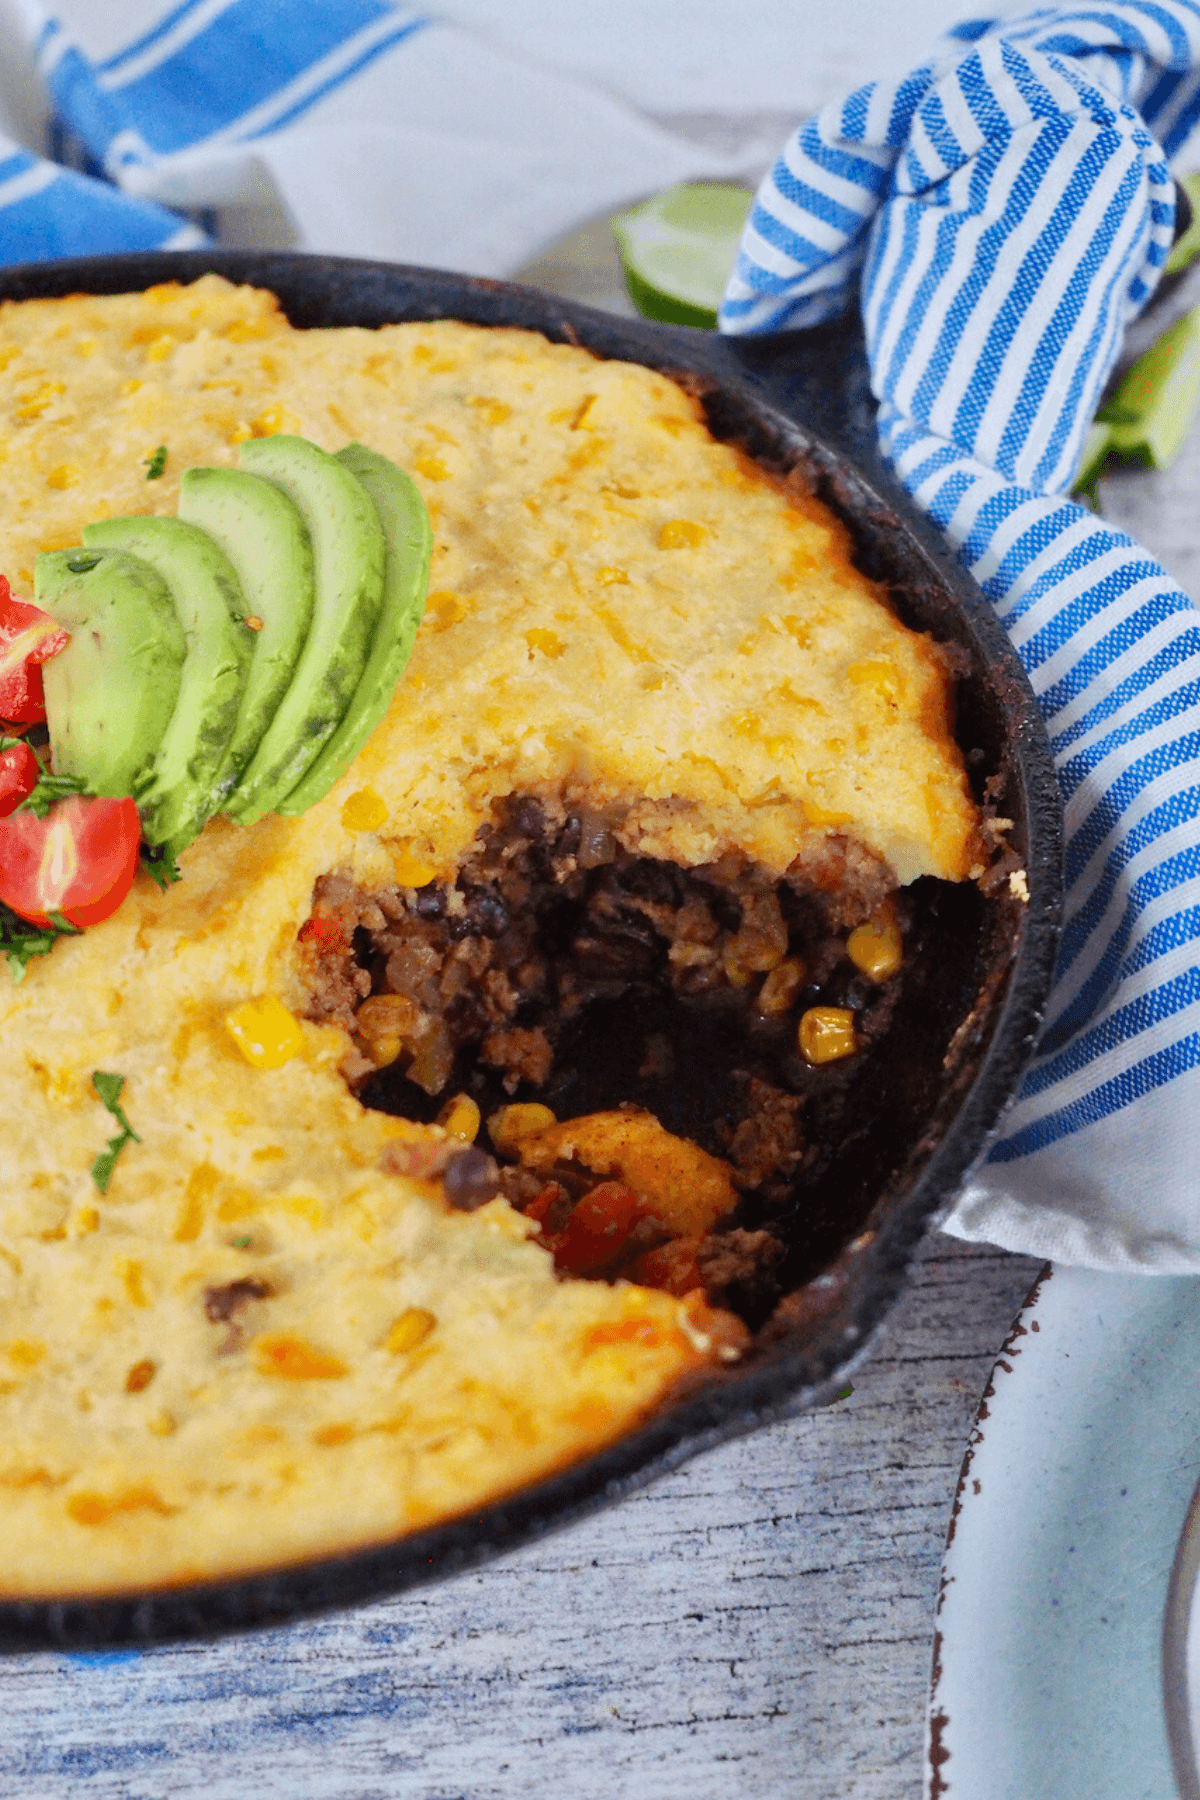 Skillet filled with Tamale Pie recipe with cornmeal crust with scoop taken out of it.